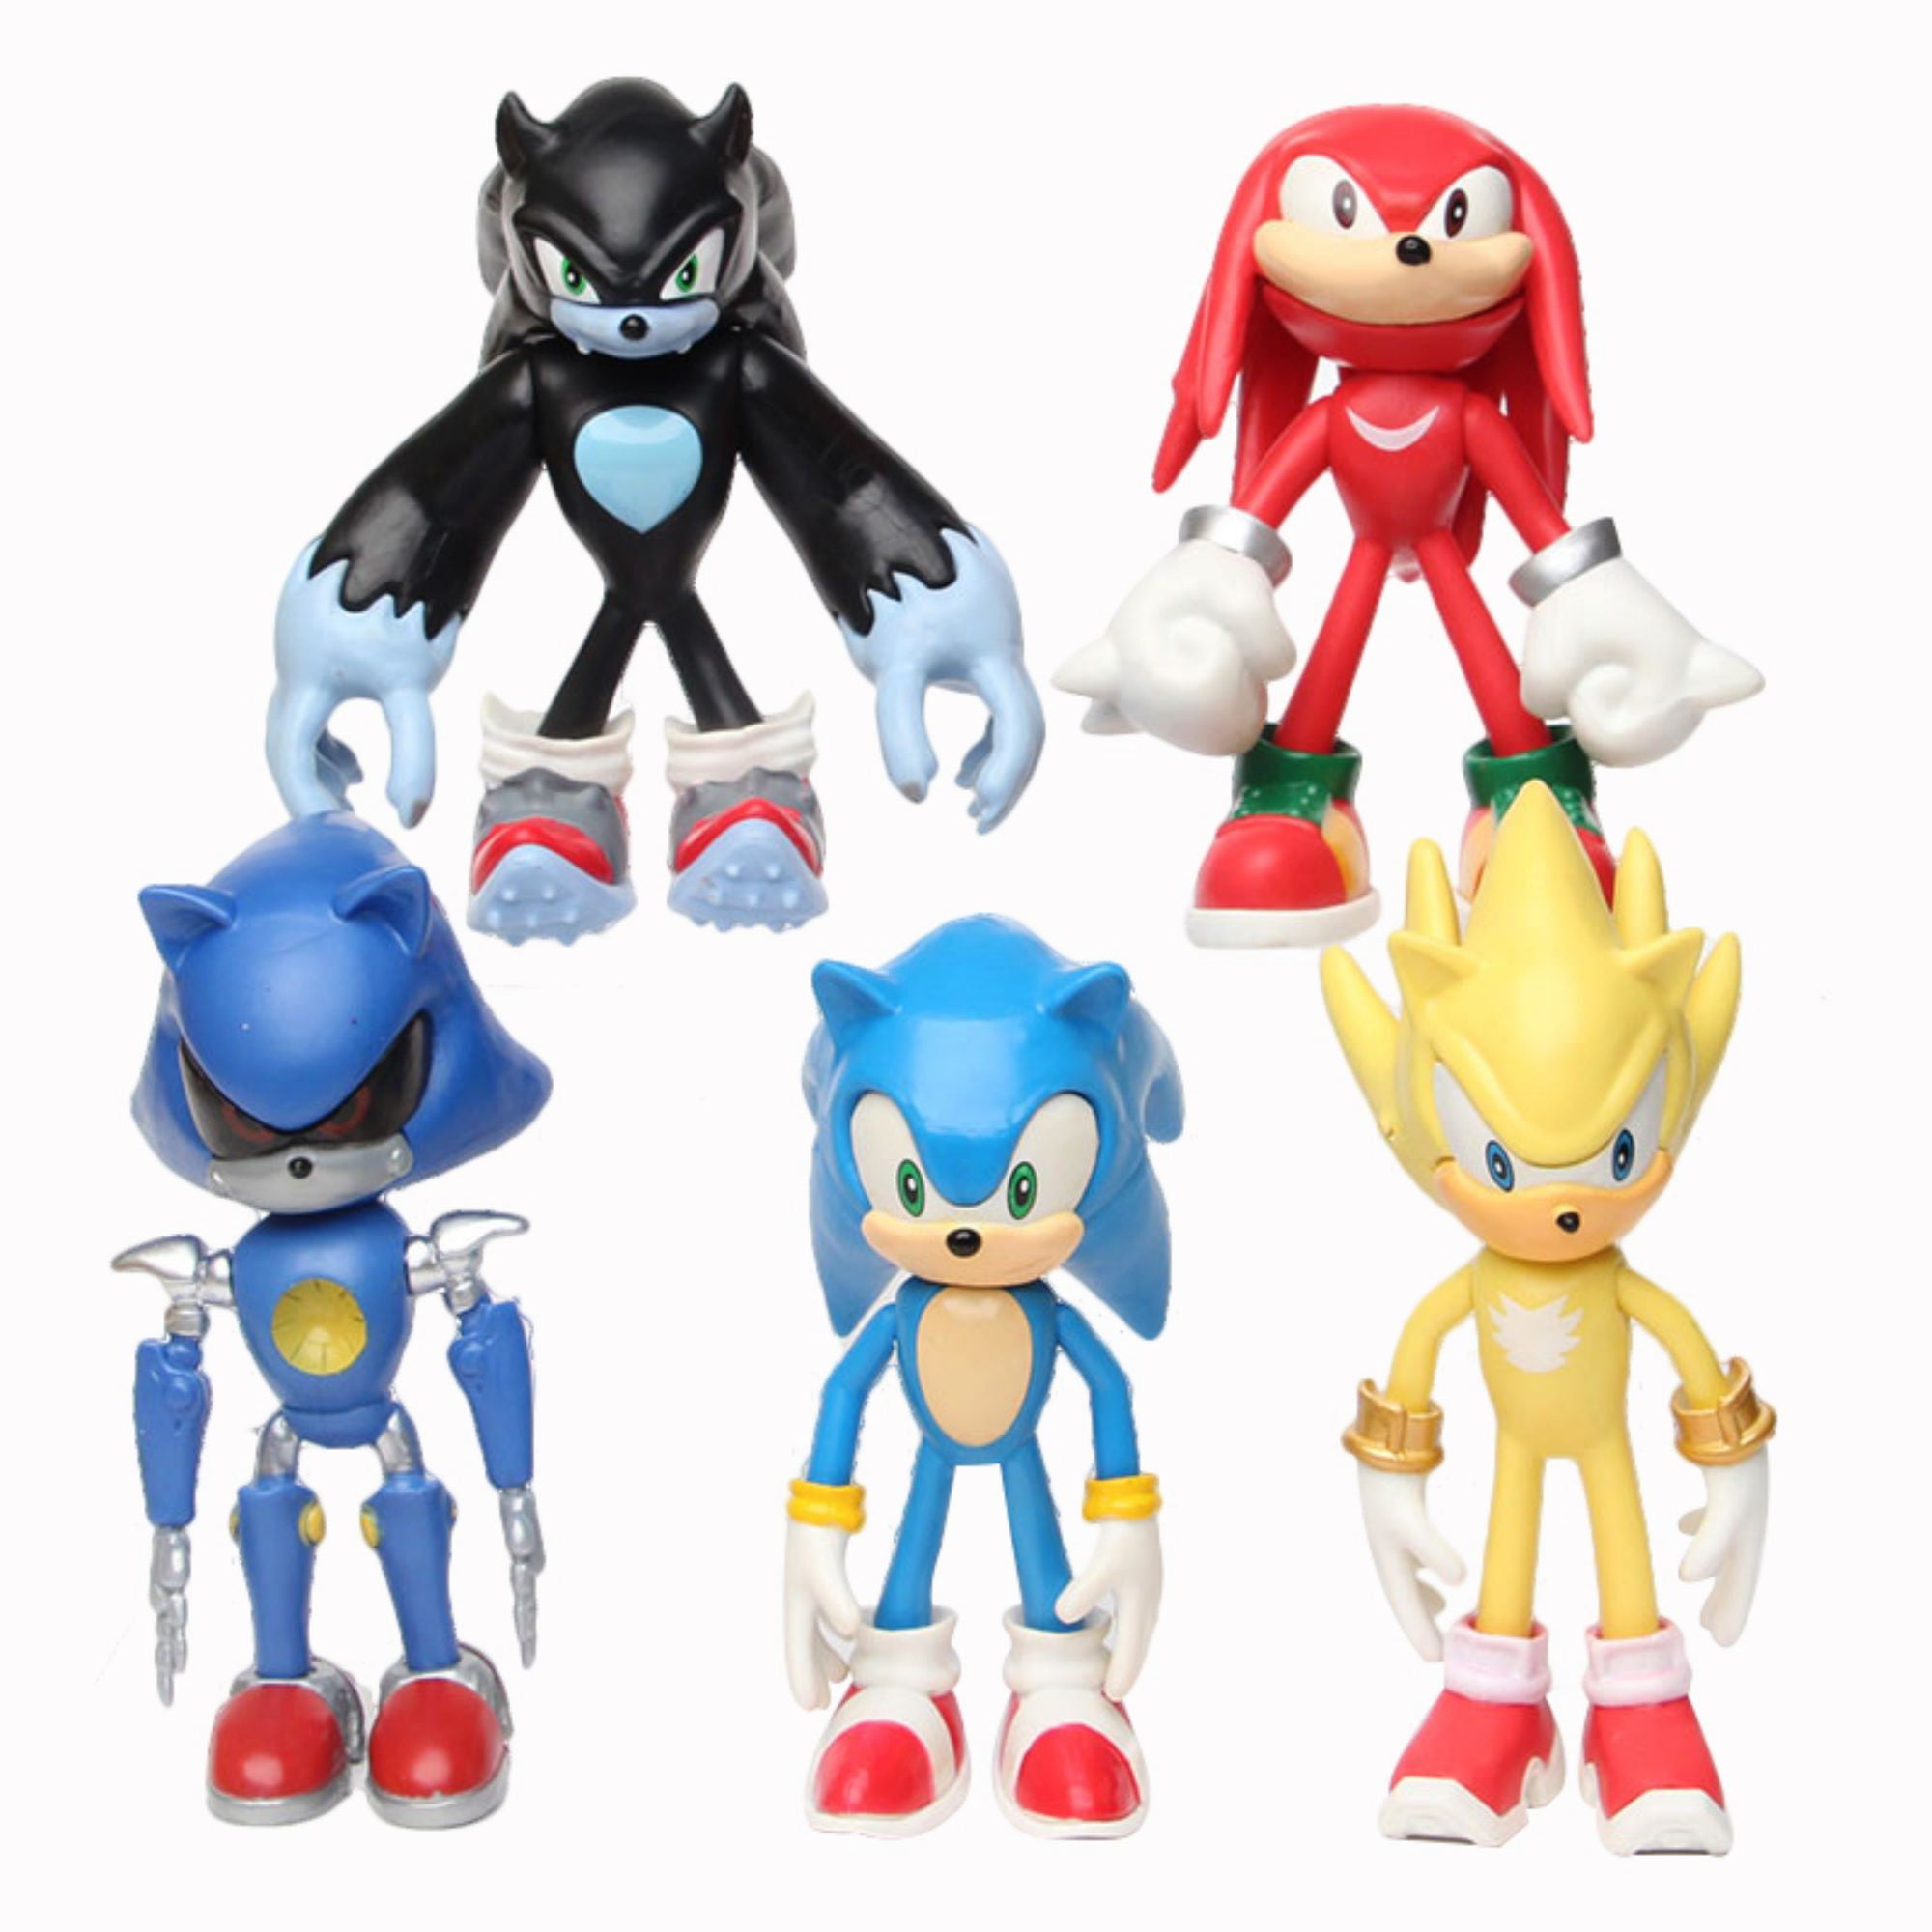 Sonic the Hedgehog Action Figures Sonic Knuckles Tails Shadow Toy Gift Kids 4" 